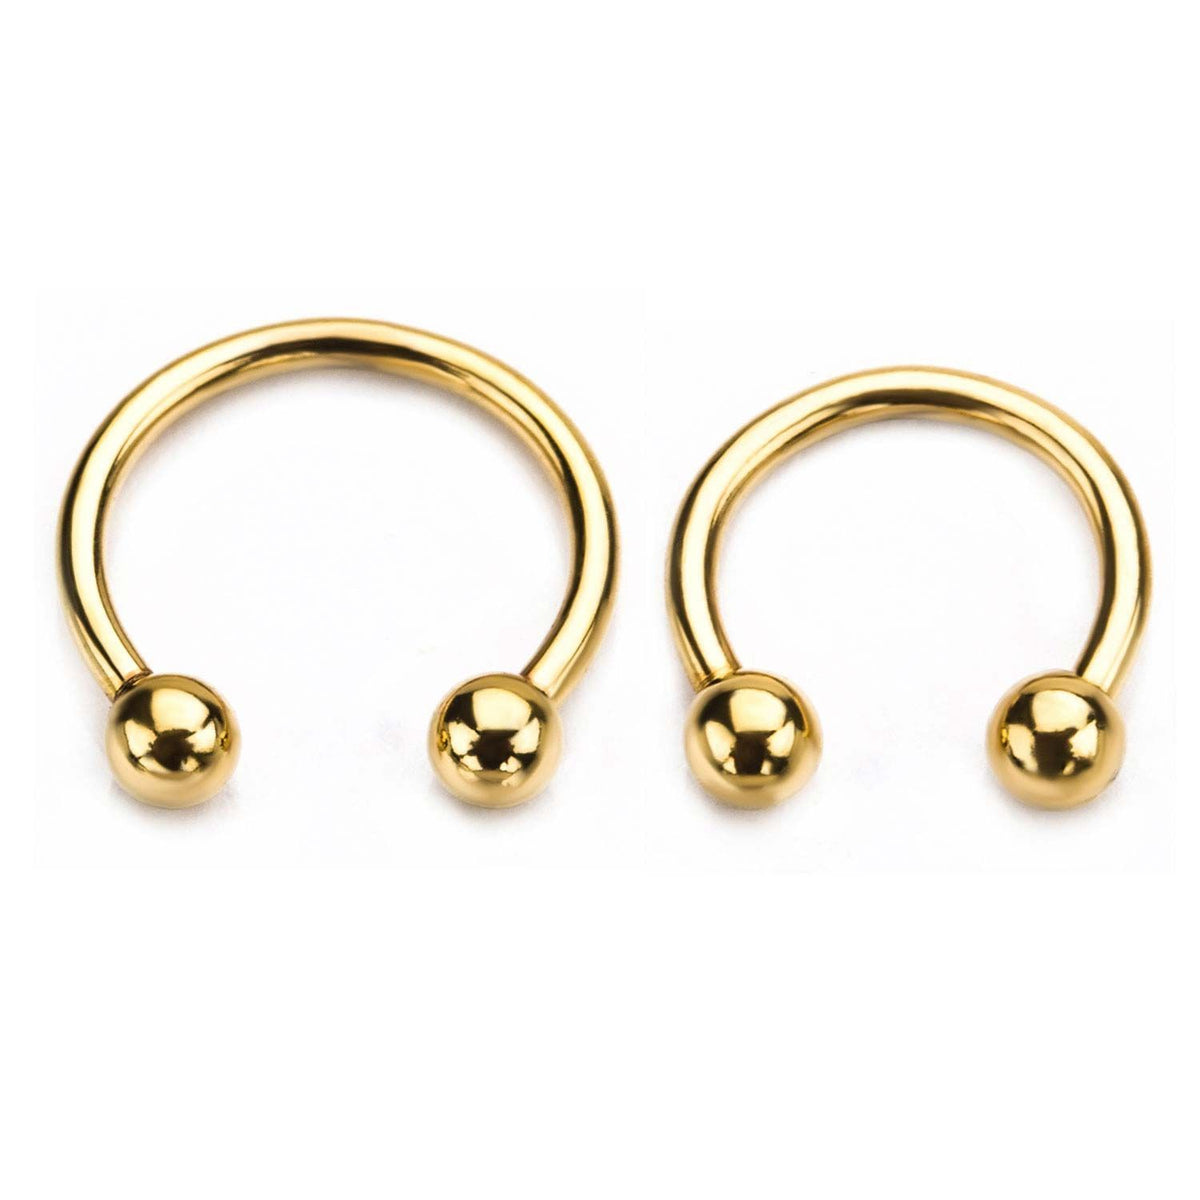 CIRCULAR BARBELL | HORSESHOE Gold Plated Horseshoes with ball ends sbvhgp -Rebel Bod-RebelBod